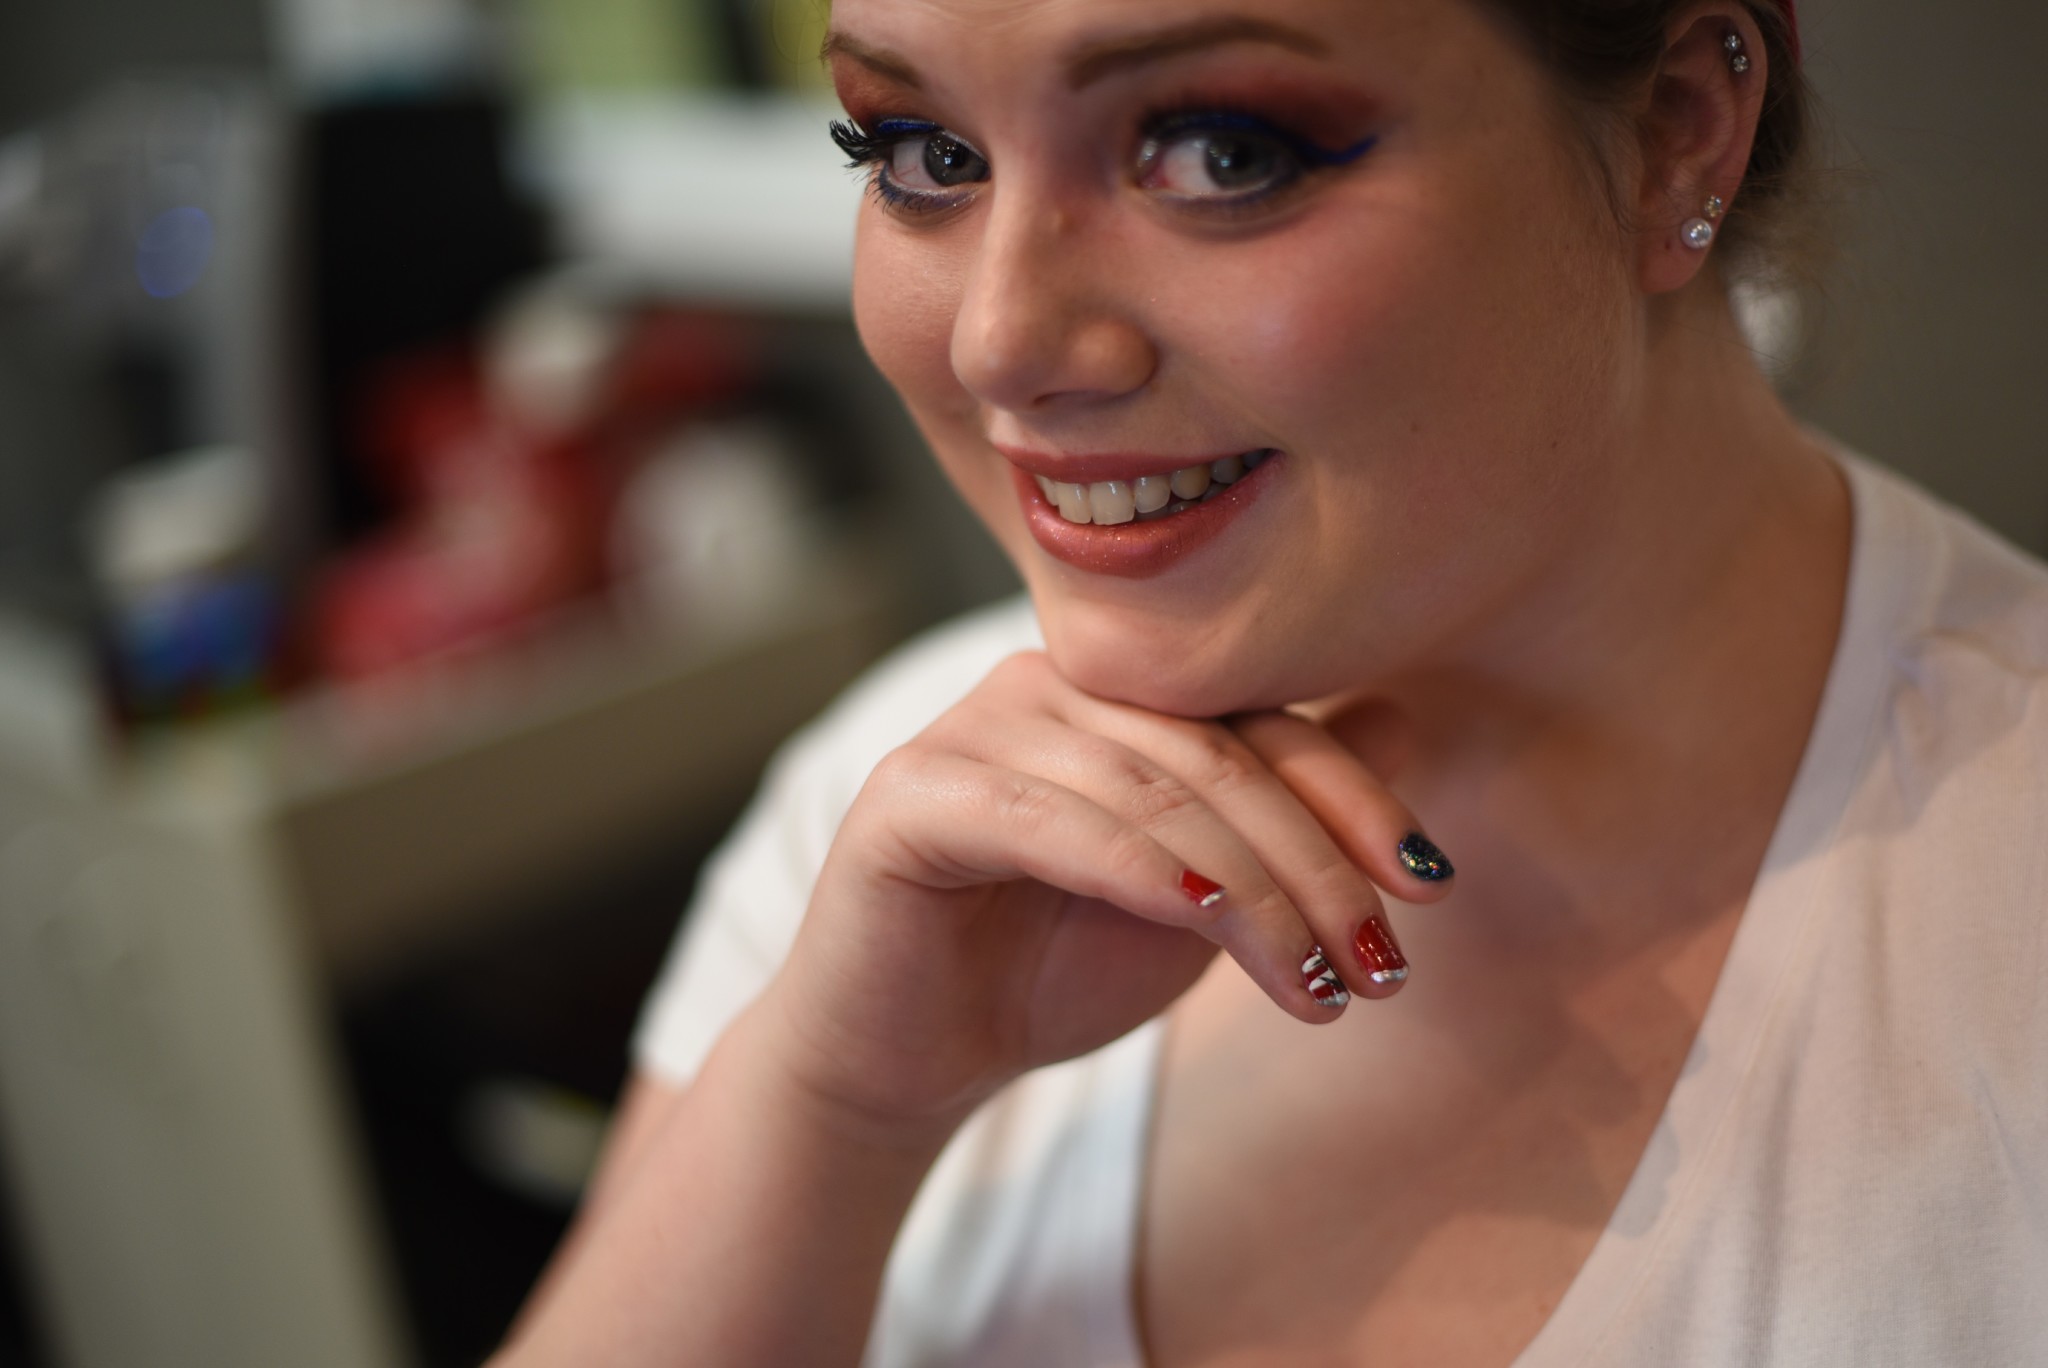 Woman smiling at the camera showing off her painted fingernails